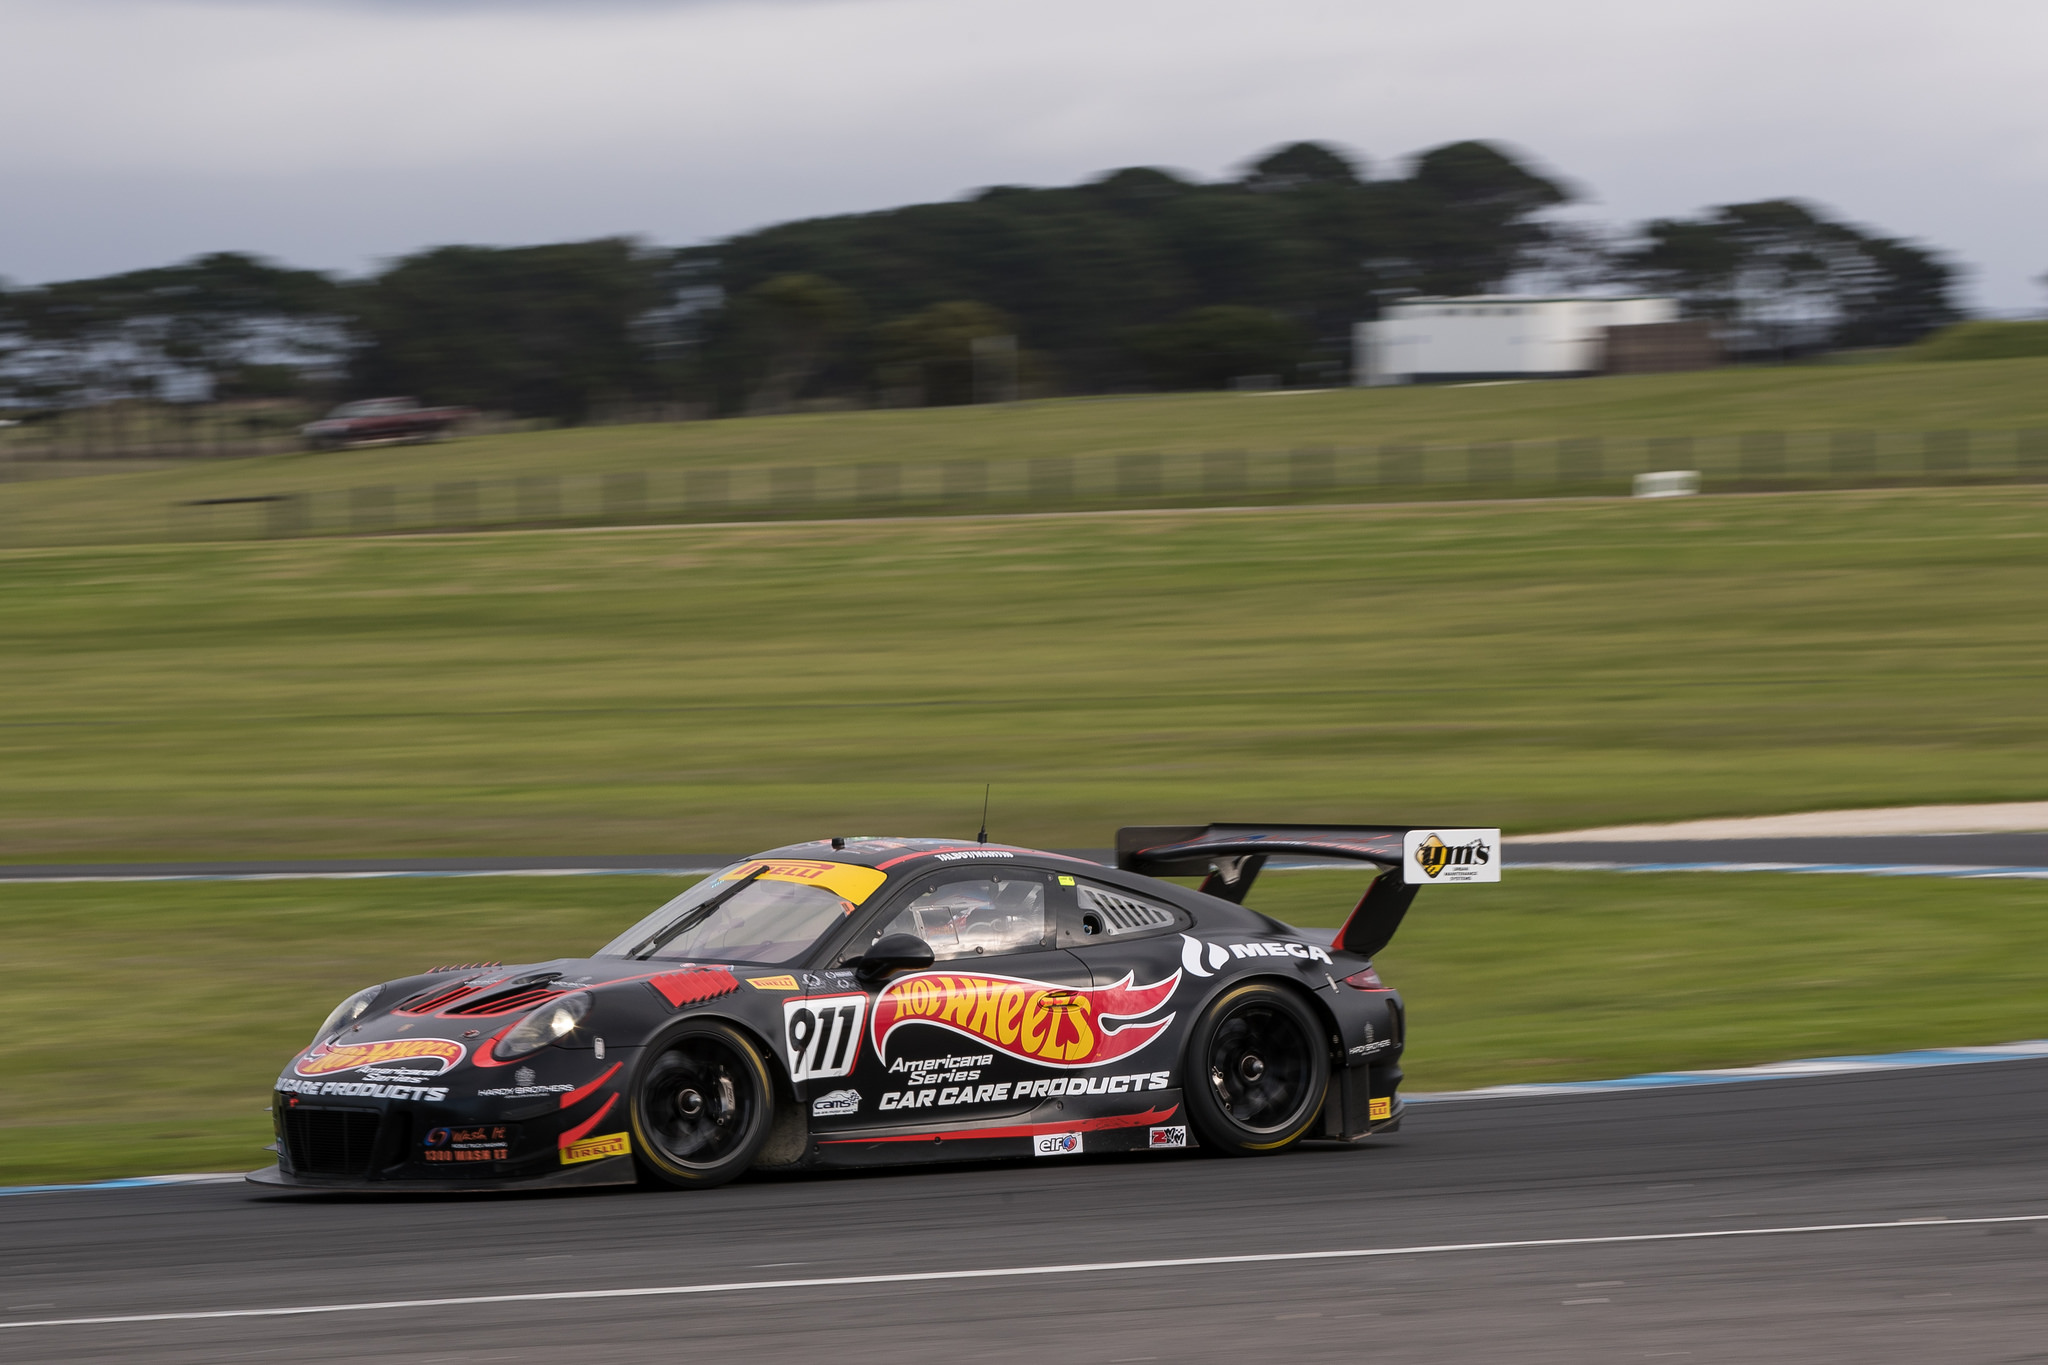 Phillip Island proves elusive again for dominant Talbot and Martin